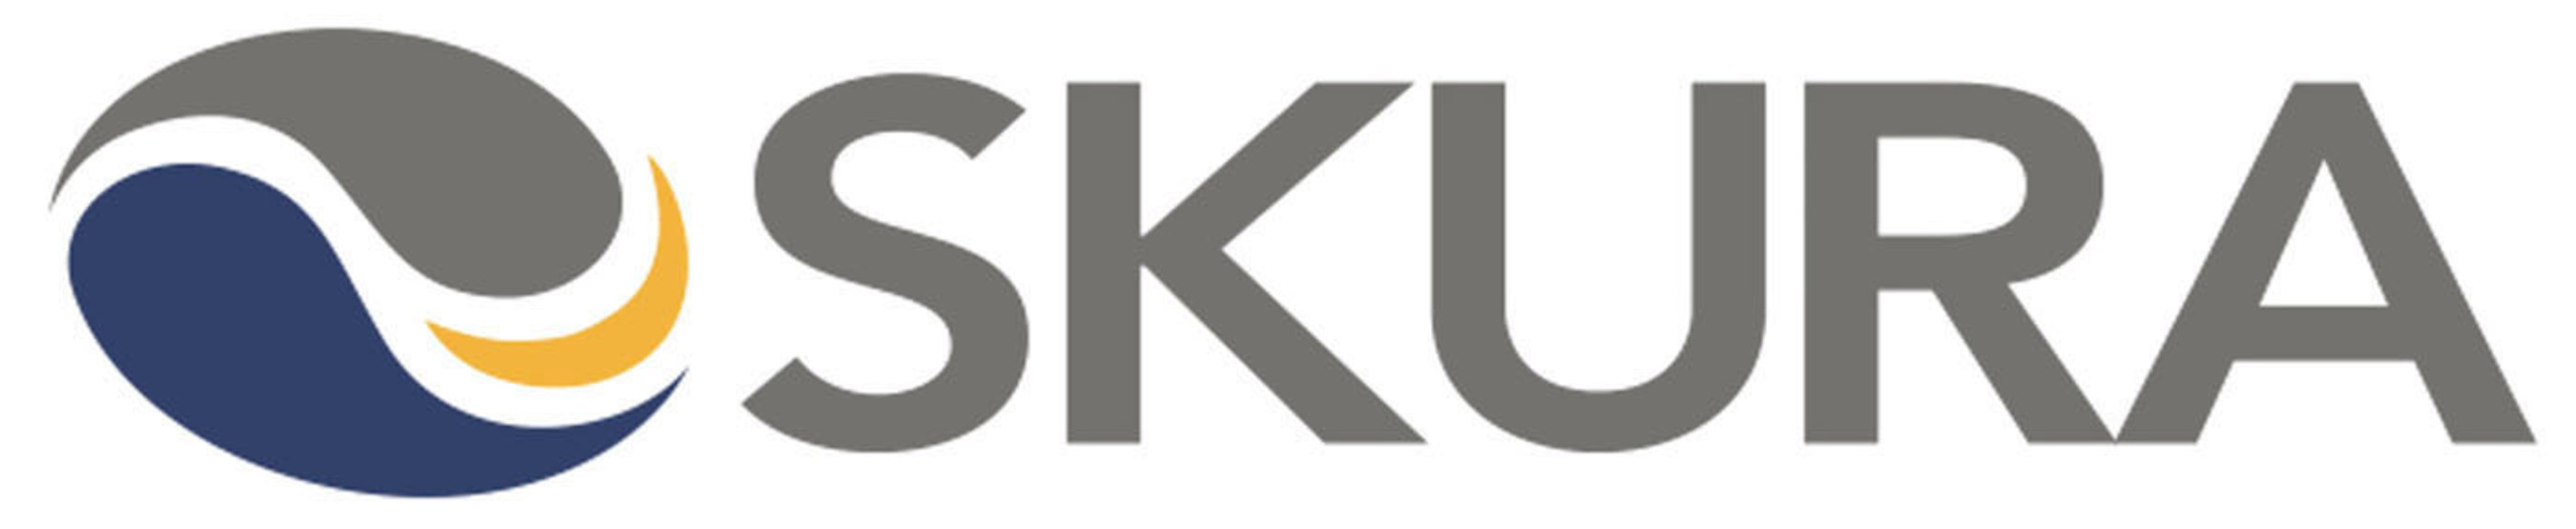 Skura Corporation - Logo. Skura is empowering the next generation of sales reps. The Skura SFX platform is the first to offer adaptive sales enablement, providing unprecedented visibility and insight throughout the entire sales process. Skura SFX enables sales and marketing executives to engage with customers across all channels and devices from a single platform providing accountability and measurement across the entire sales cycle. The Skura SFX platform offers next-generation predictive analytics, ensuring the right message reaches the right person at the right time, increasing sales and customer success. For more information, visit:  www.skura.com . (PRNewsFoto/Skura Corporation) (PRNewsFoto/SKURA CORPORATION)